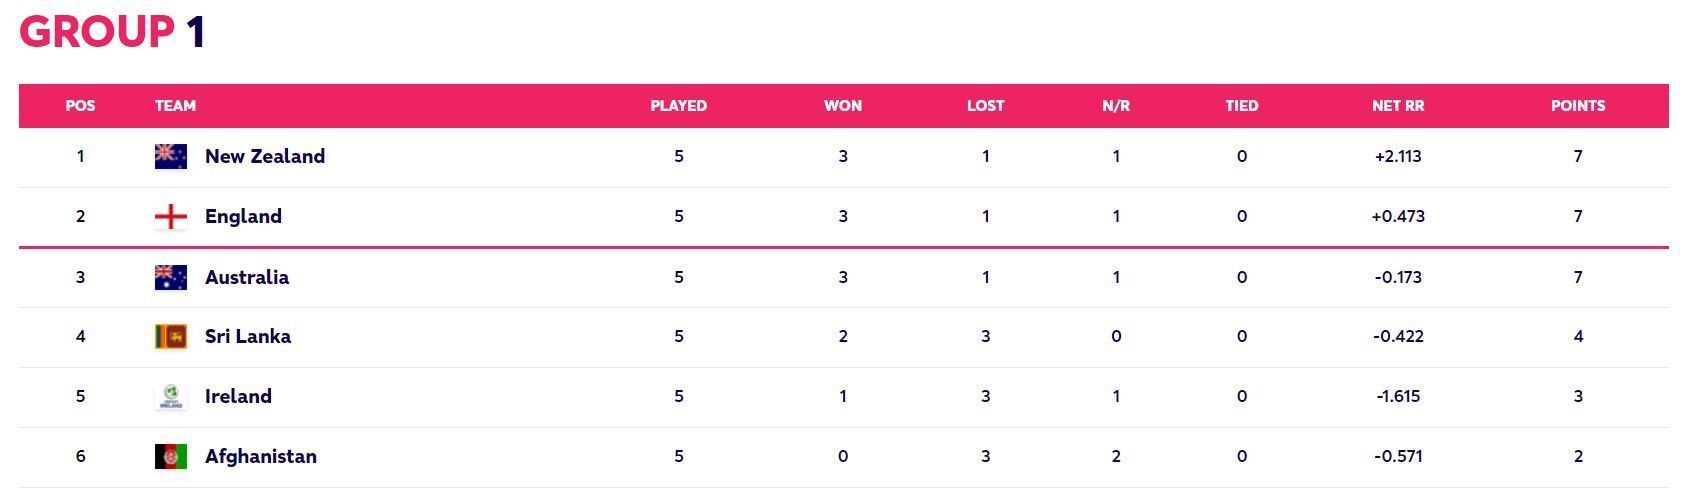 Updated Points Table after Match 39 (Image Courtesy: www.t20worldcup.com)